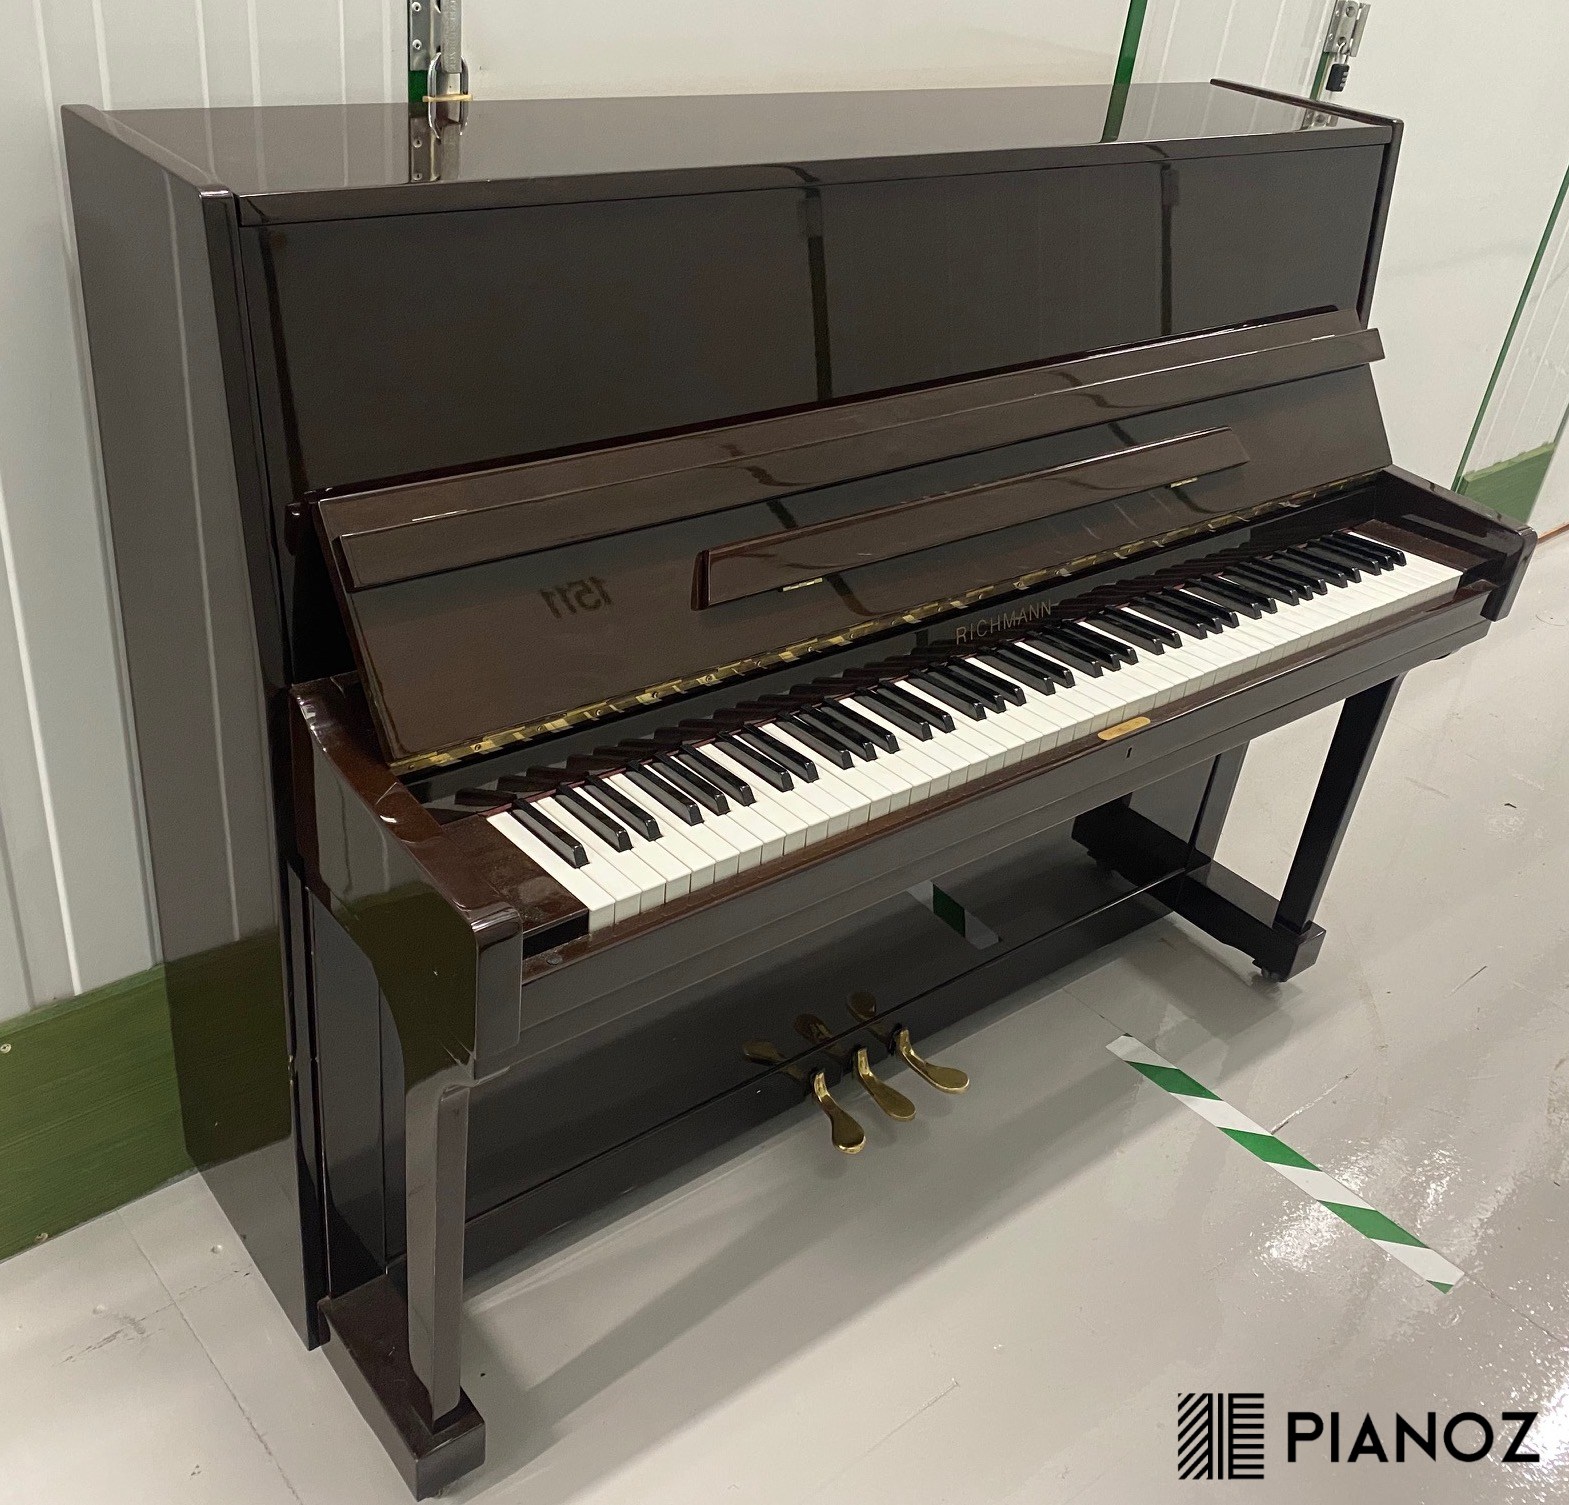 Richmann Modern Upright Piano piano for sale in UK